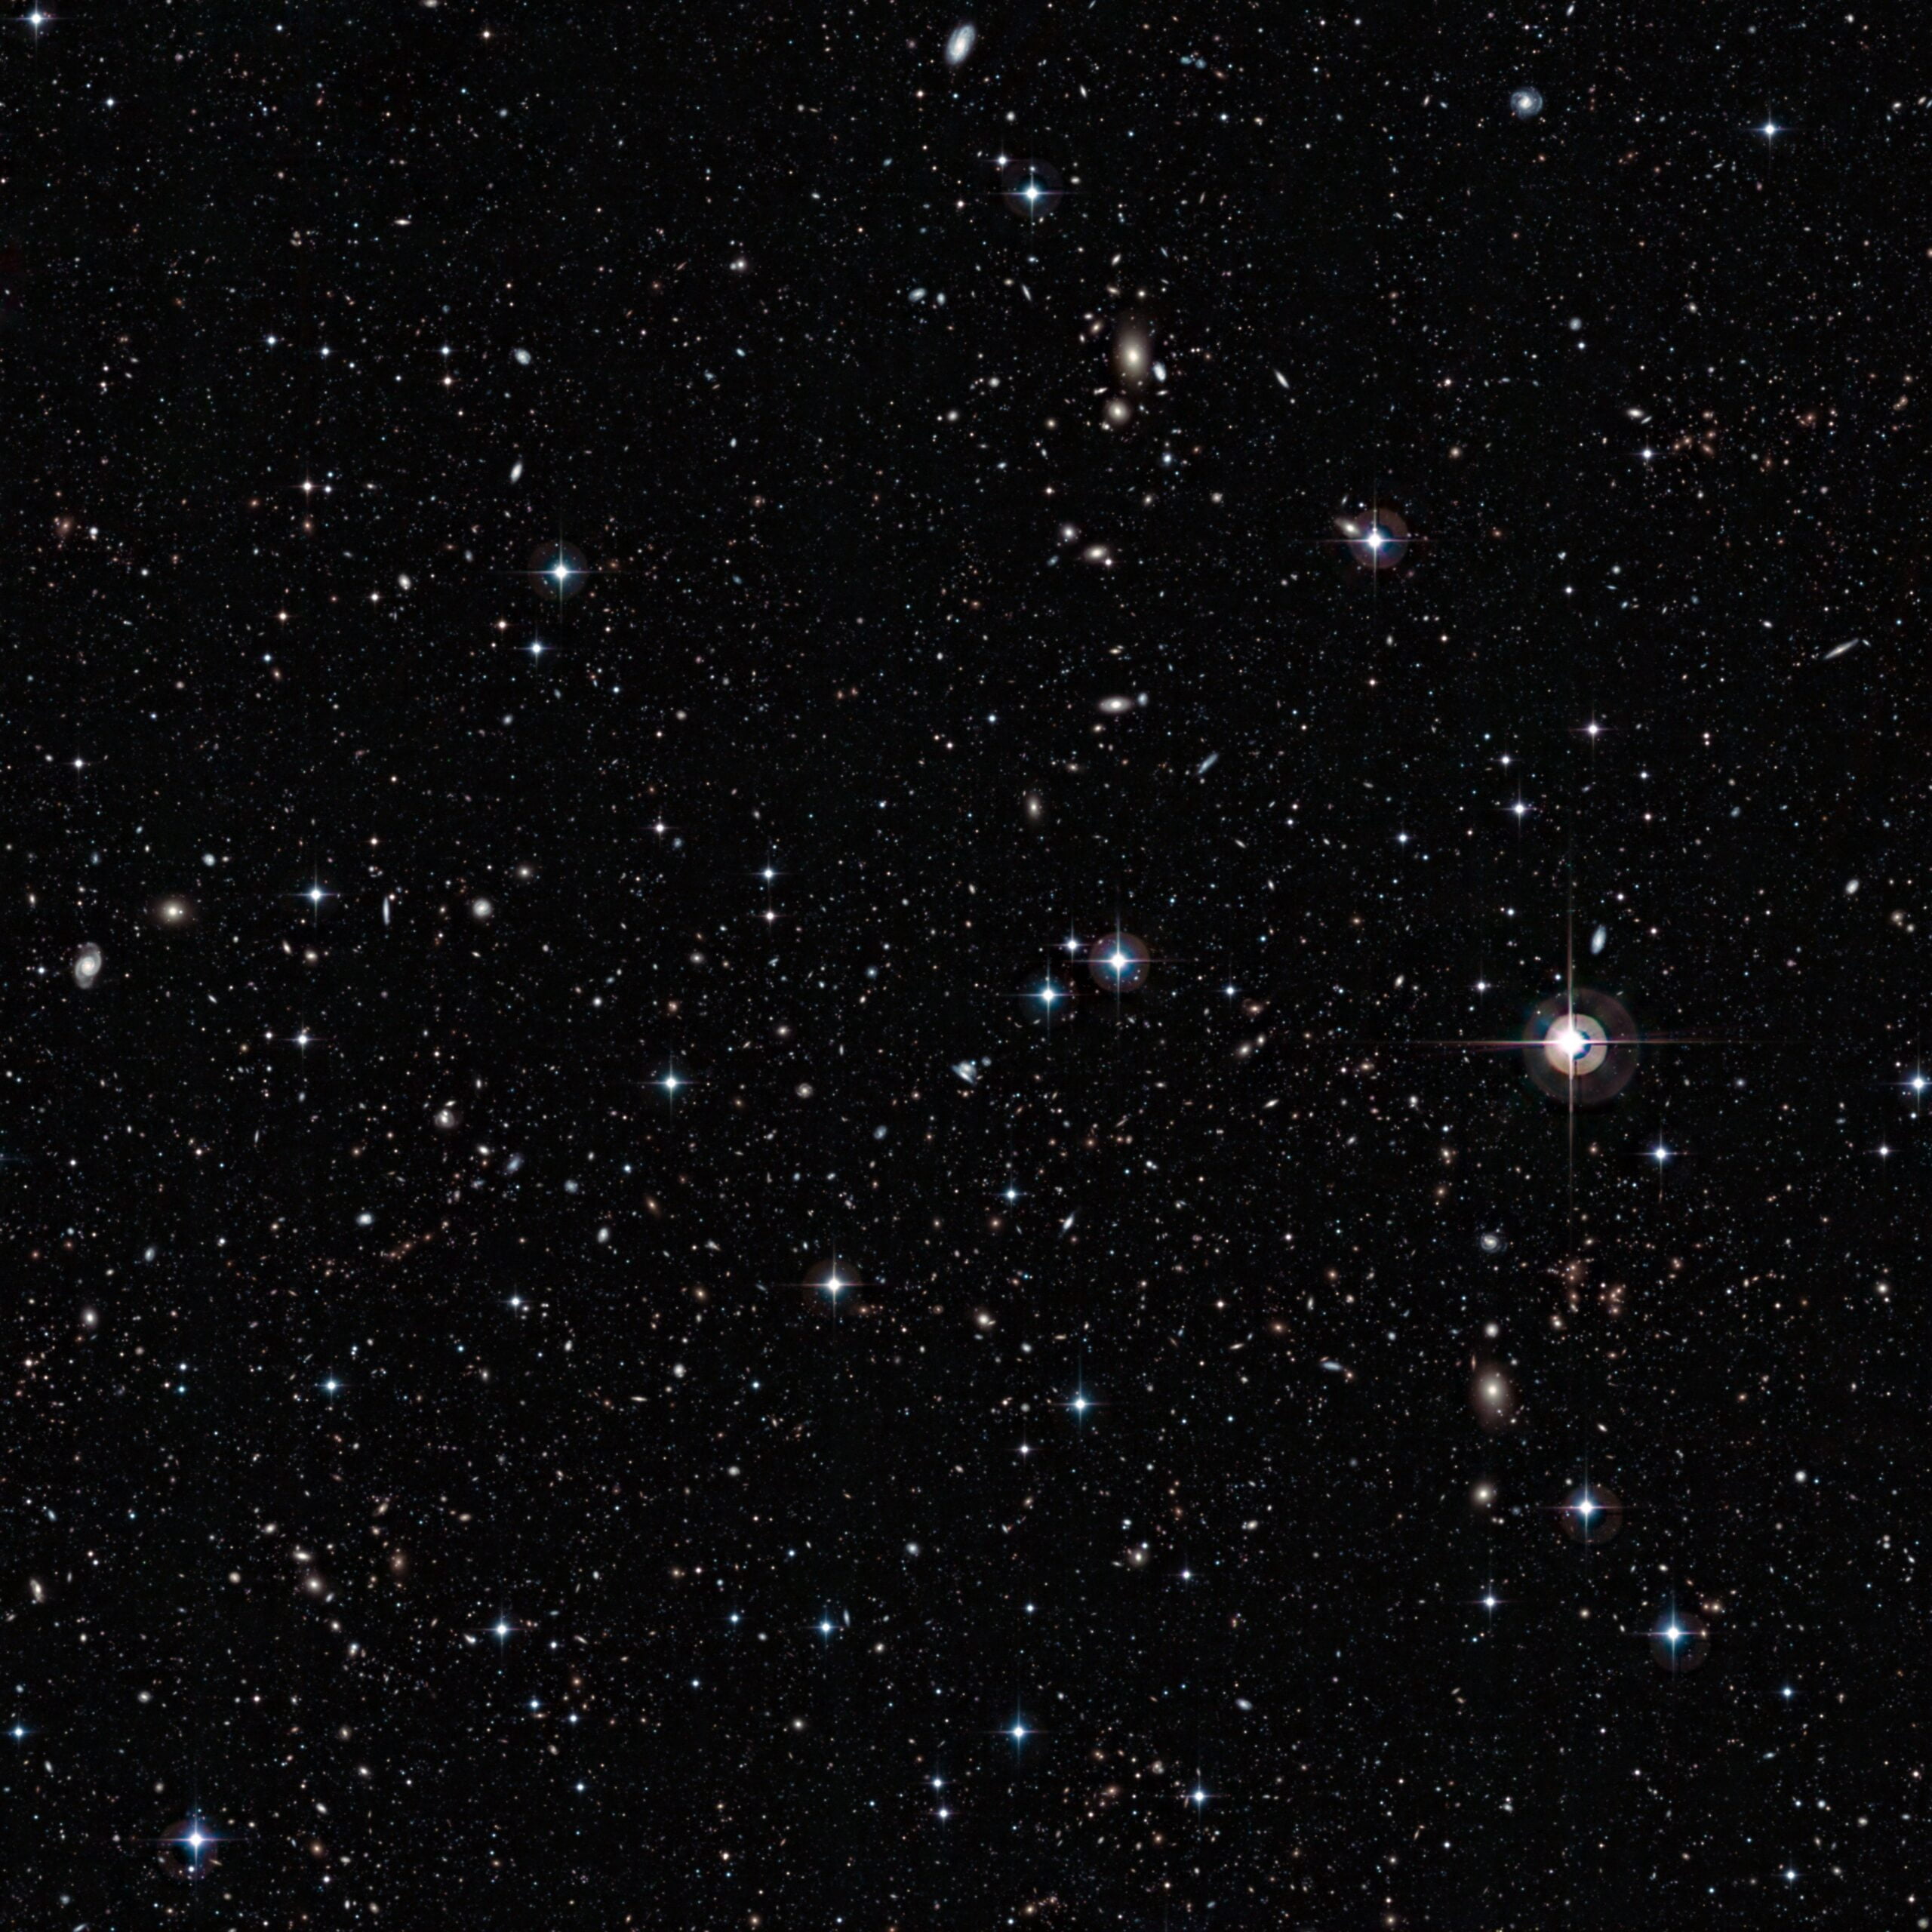 Stars can be seen in this image